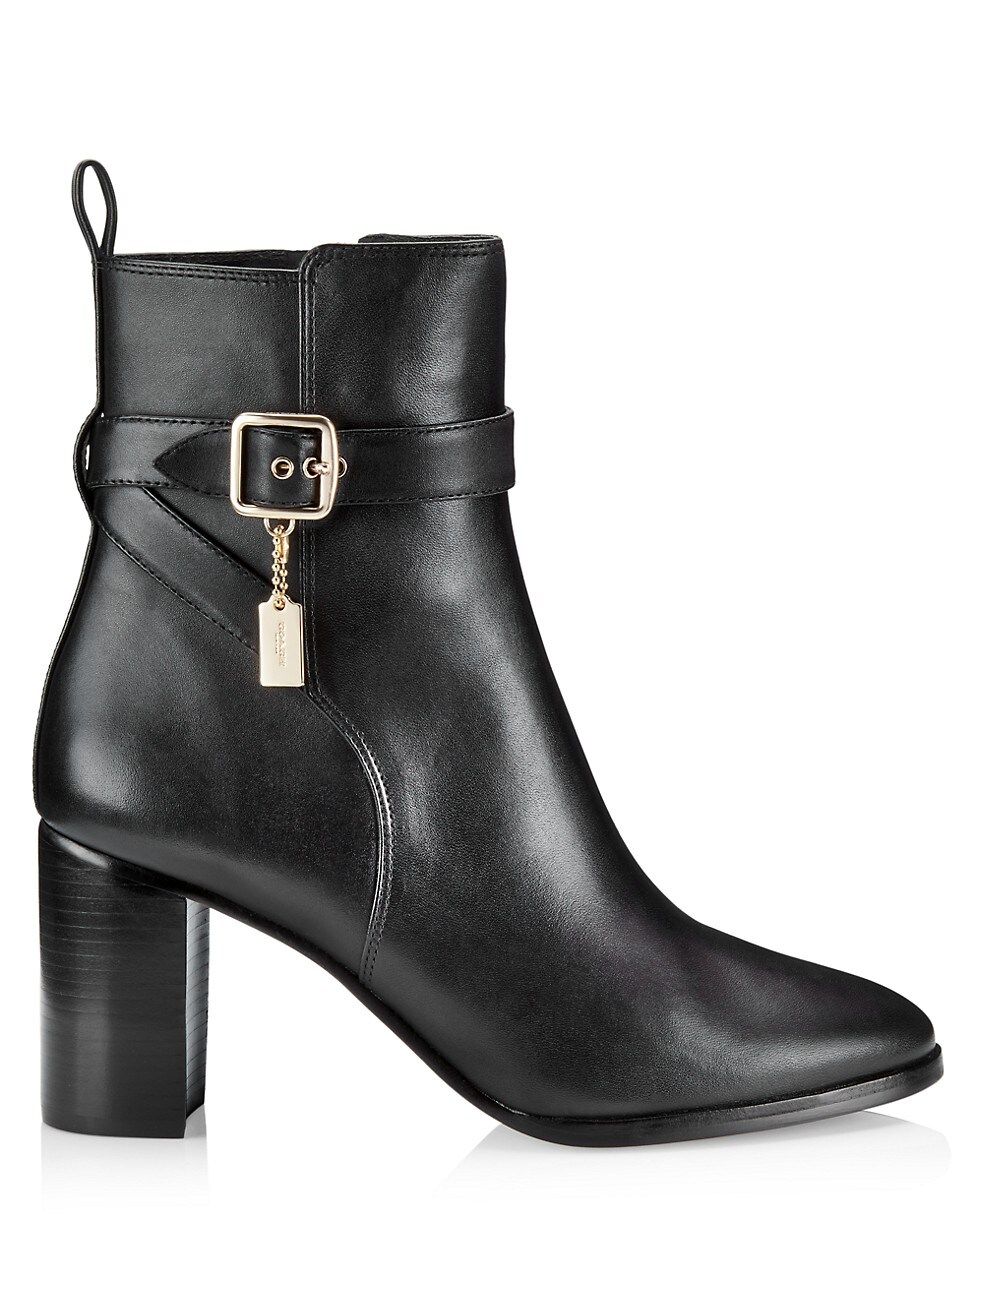 COACH Olivia Leather Ankle Booties | Saks Fifth Avenue